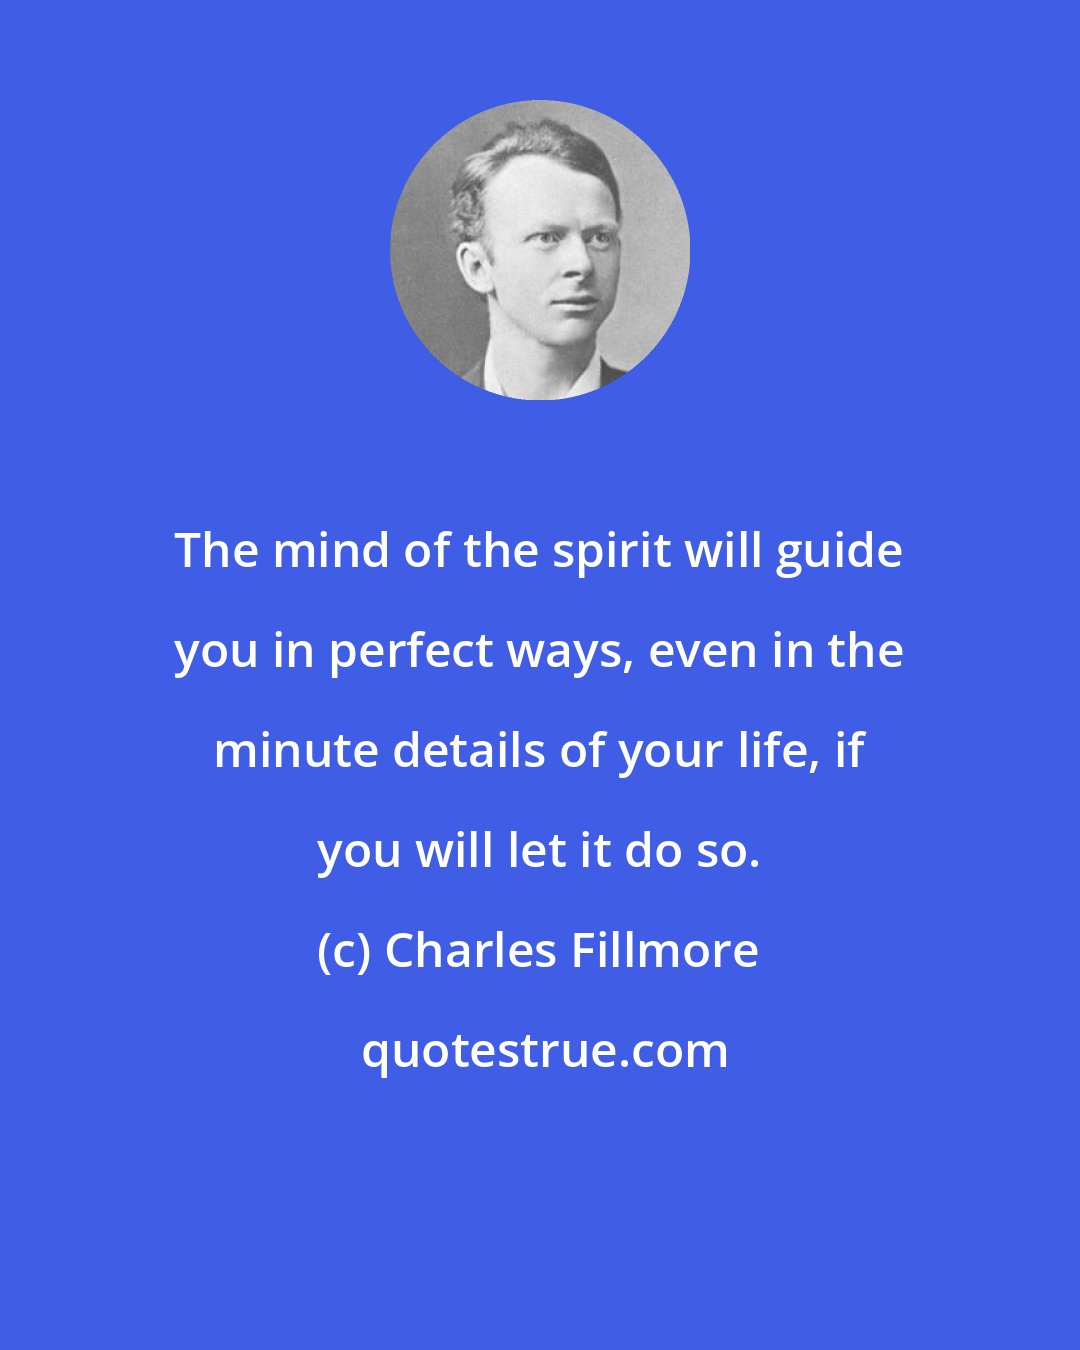 Charles Fillmore: The mind of the spirit will guide you in perfect ways, even in the minute details of your life, if you will let it do so.